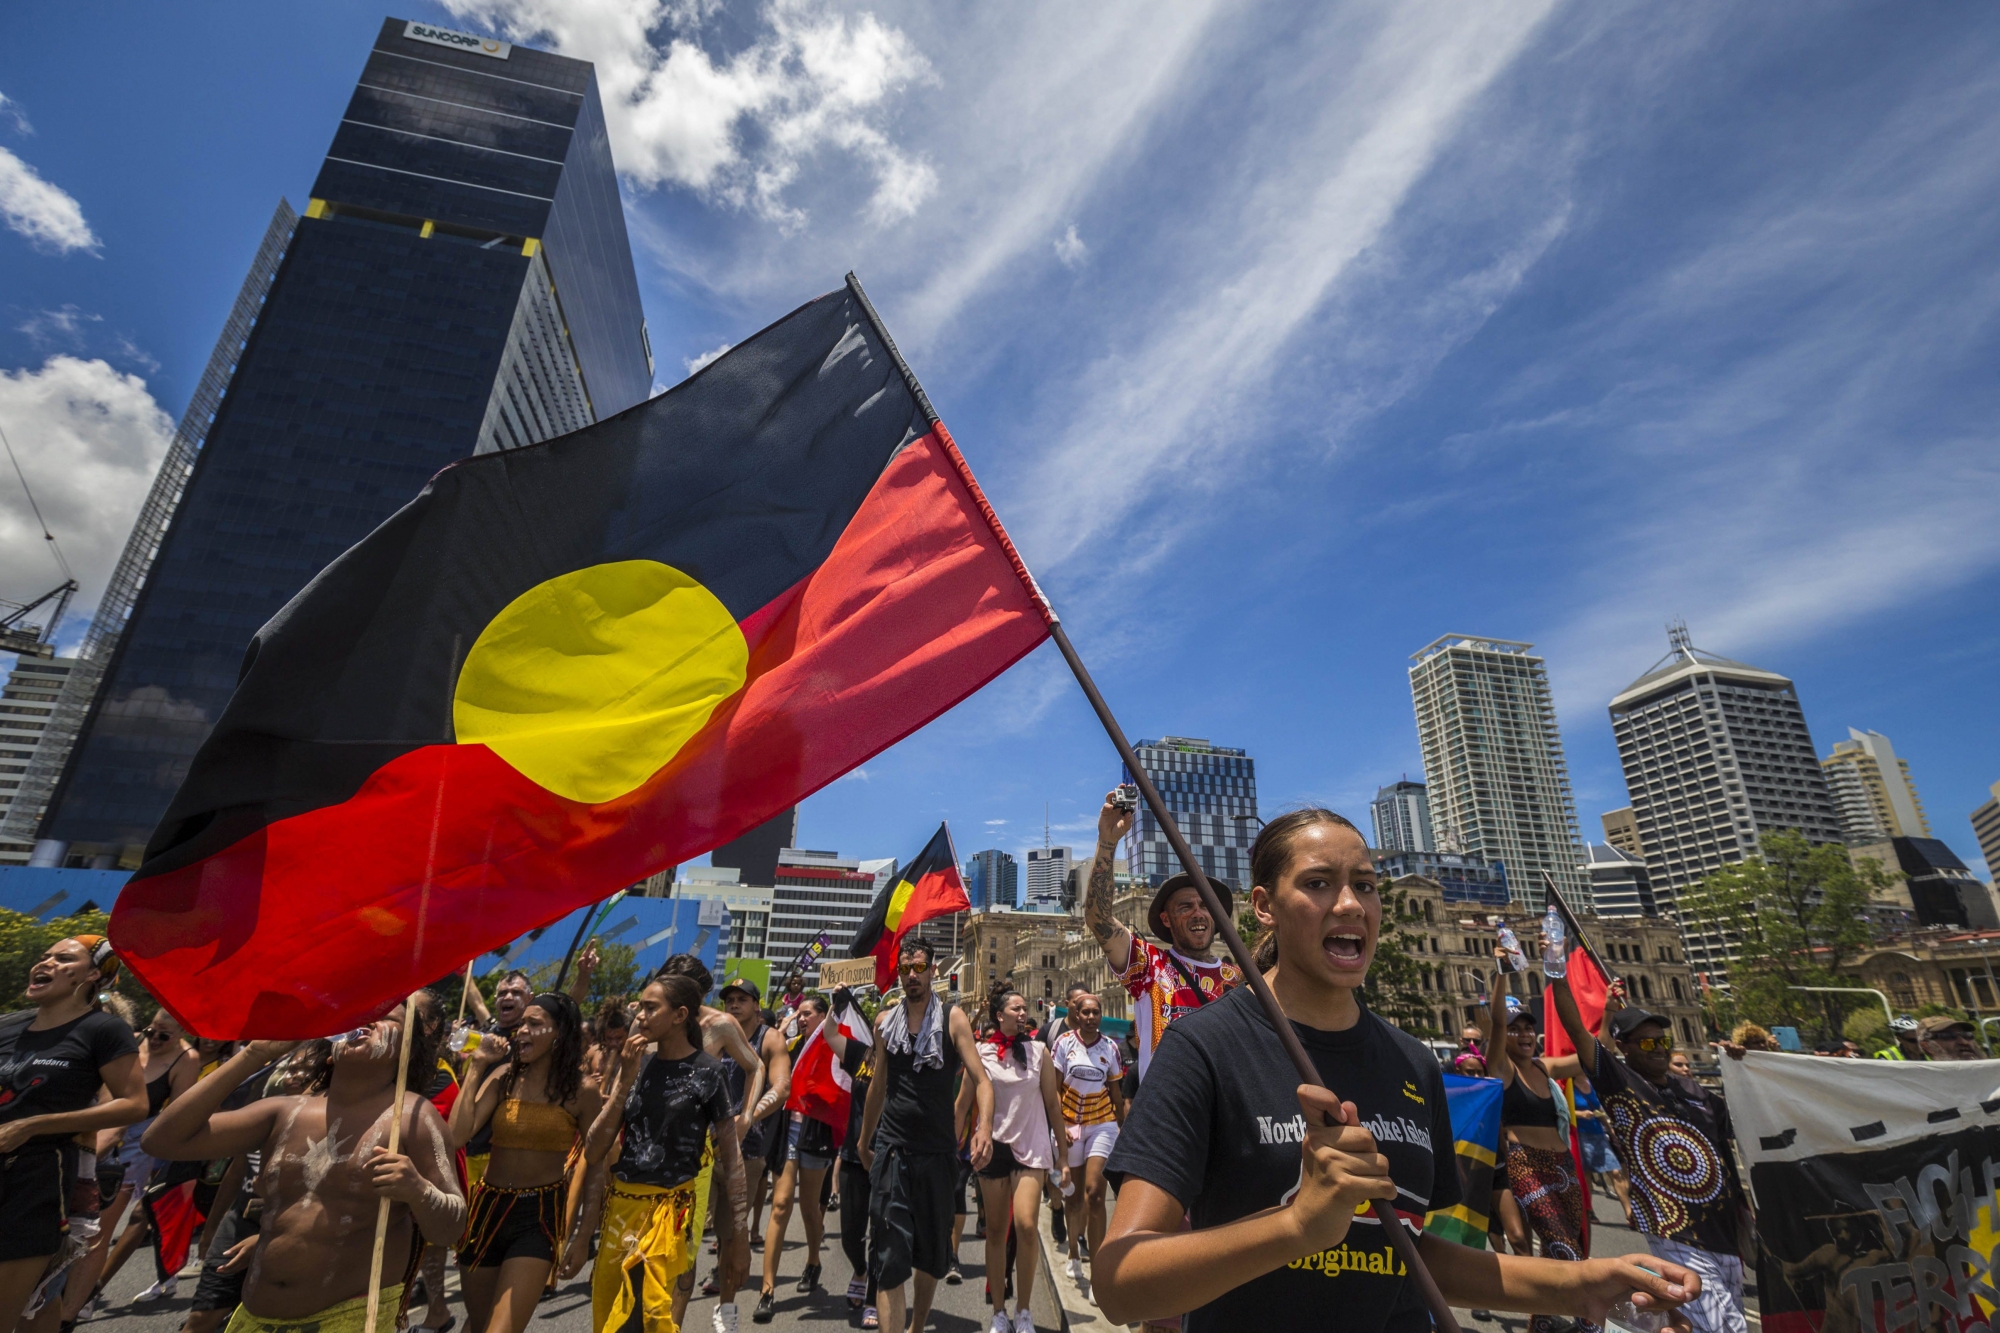 epa06475512 Protestors participate in an Invasion Day march on Australia Day in Brisbane, Queensland, Australia, 26 January 2018. Activists demonstrated against Australia Day, which is celebrated annually on 26 January to mark the arrival of the first British convict fleet in 1788.  EPA/GLENN HUNT  AUSTRALIA AND NEW ZEALAND OUT AUSTRALIA NATIONAL DAY